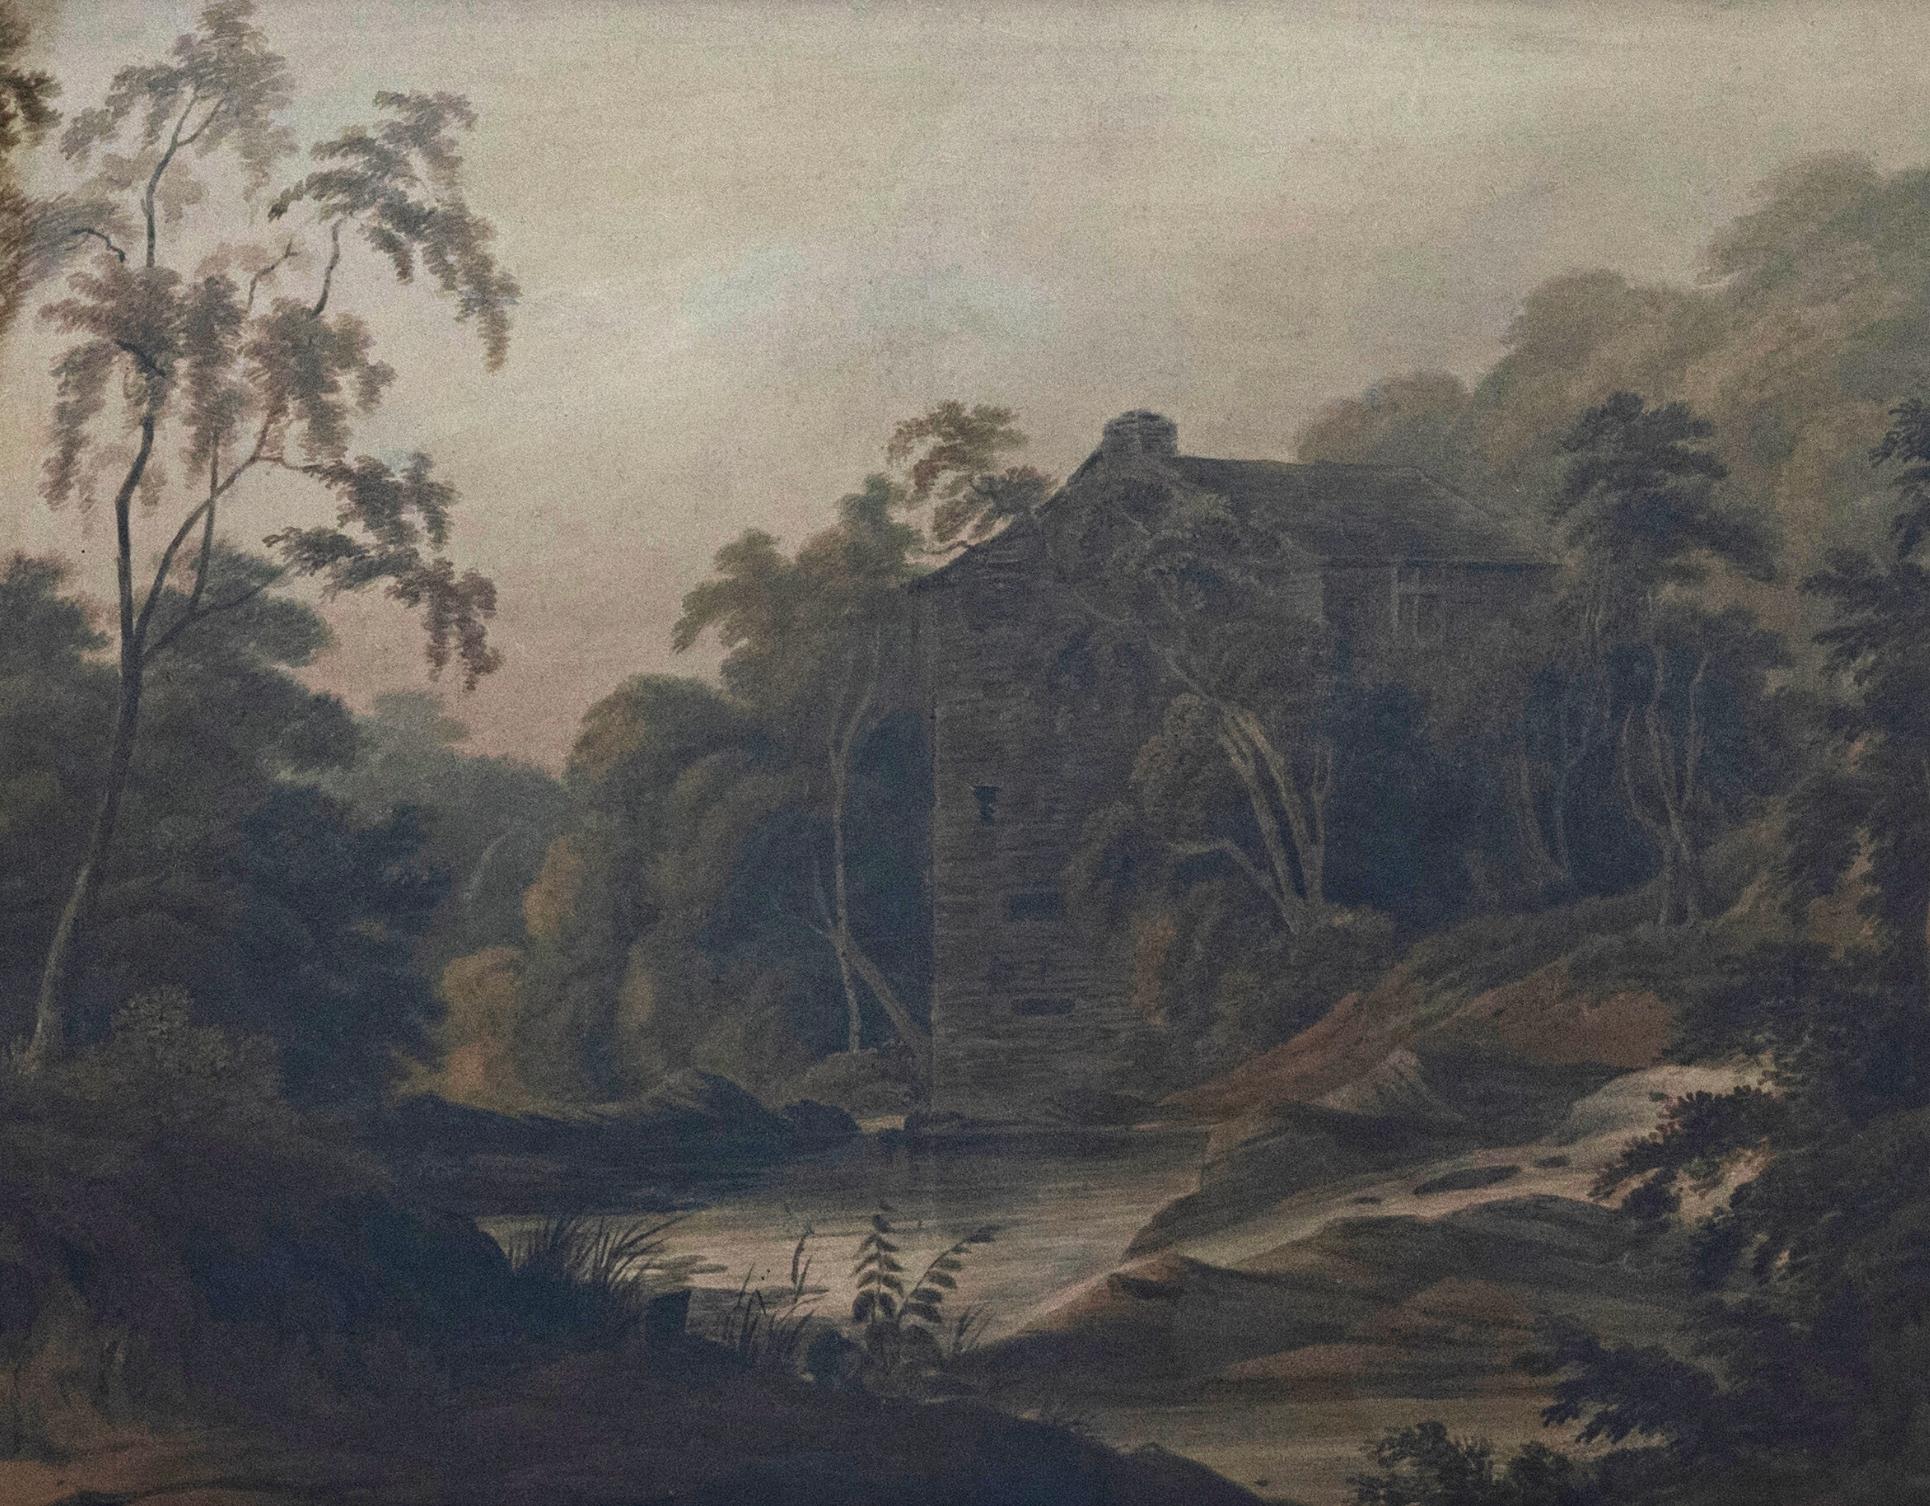 A charming landscape scene depicting a mill on the river's edge. The artist captures the scene in fine detail, with the delicate painting of the trees and foliage being very indicative of a the style of the early 19th Century. Unsigned. Label to the